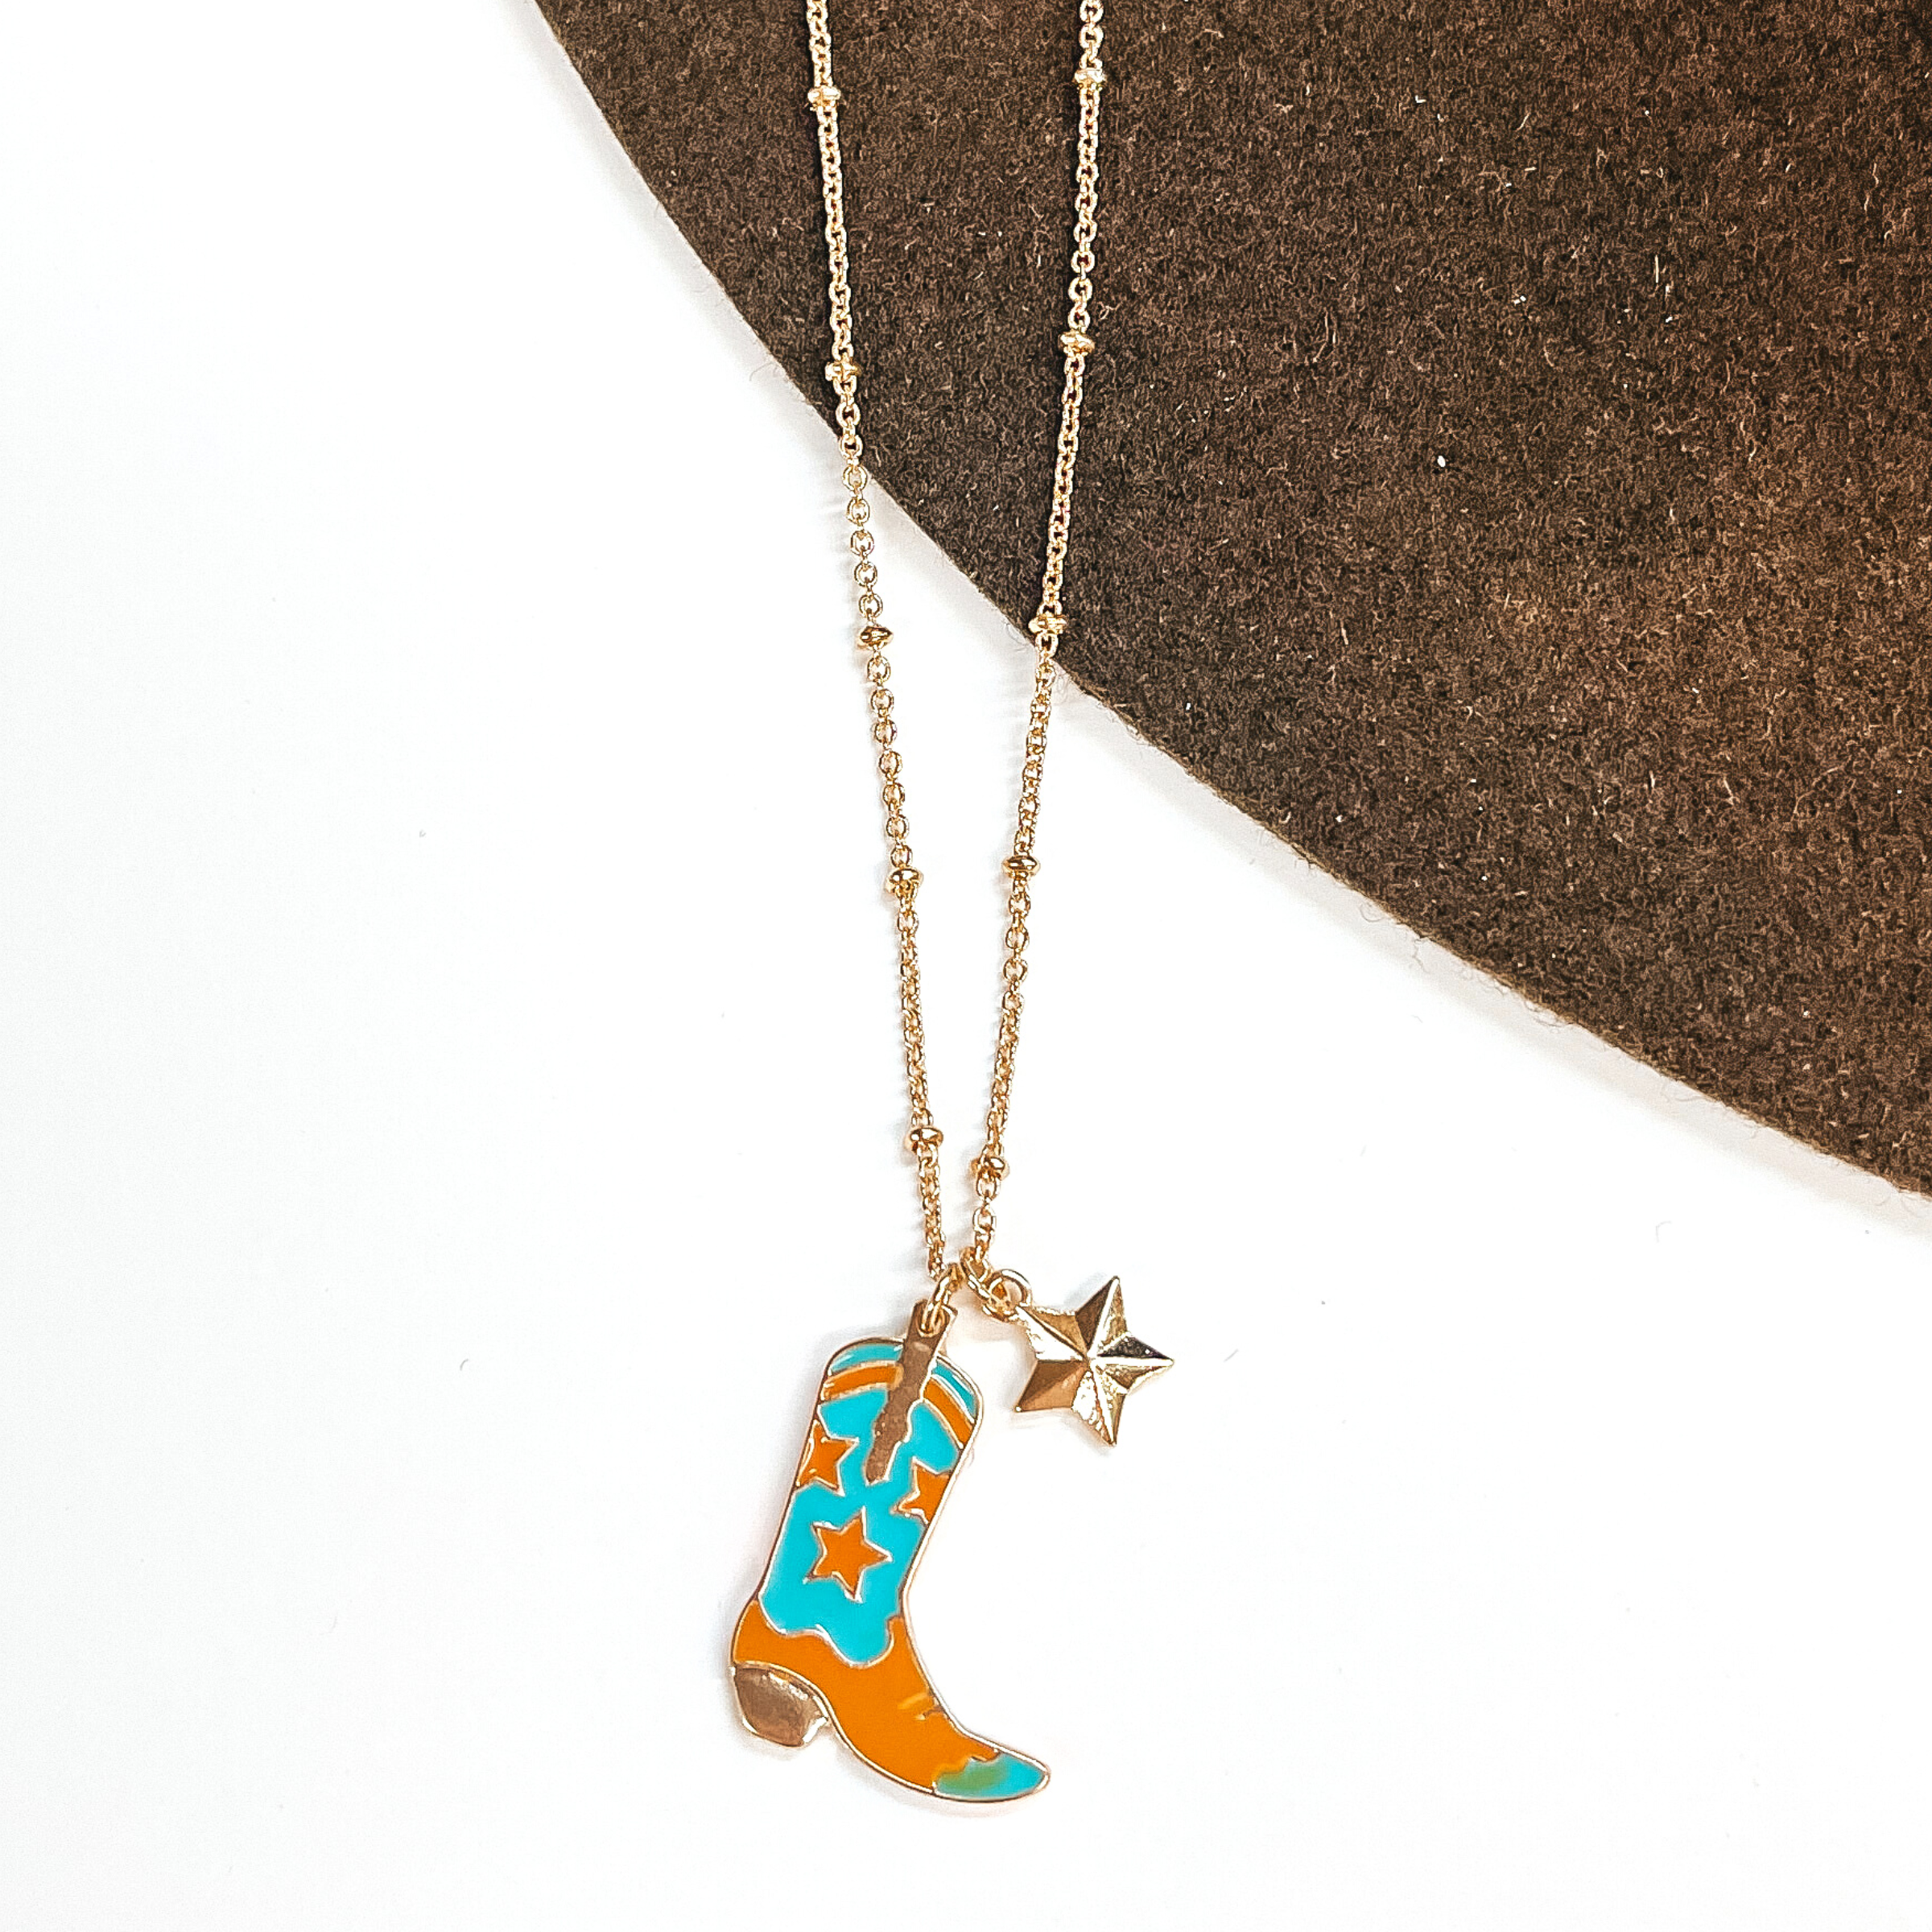 Gold chain necklace with a gold star charm and a turquoise and tan star print boot charm. This necklace is pictured on a white and brown background.